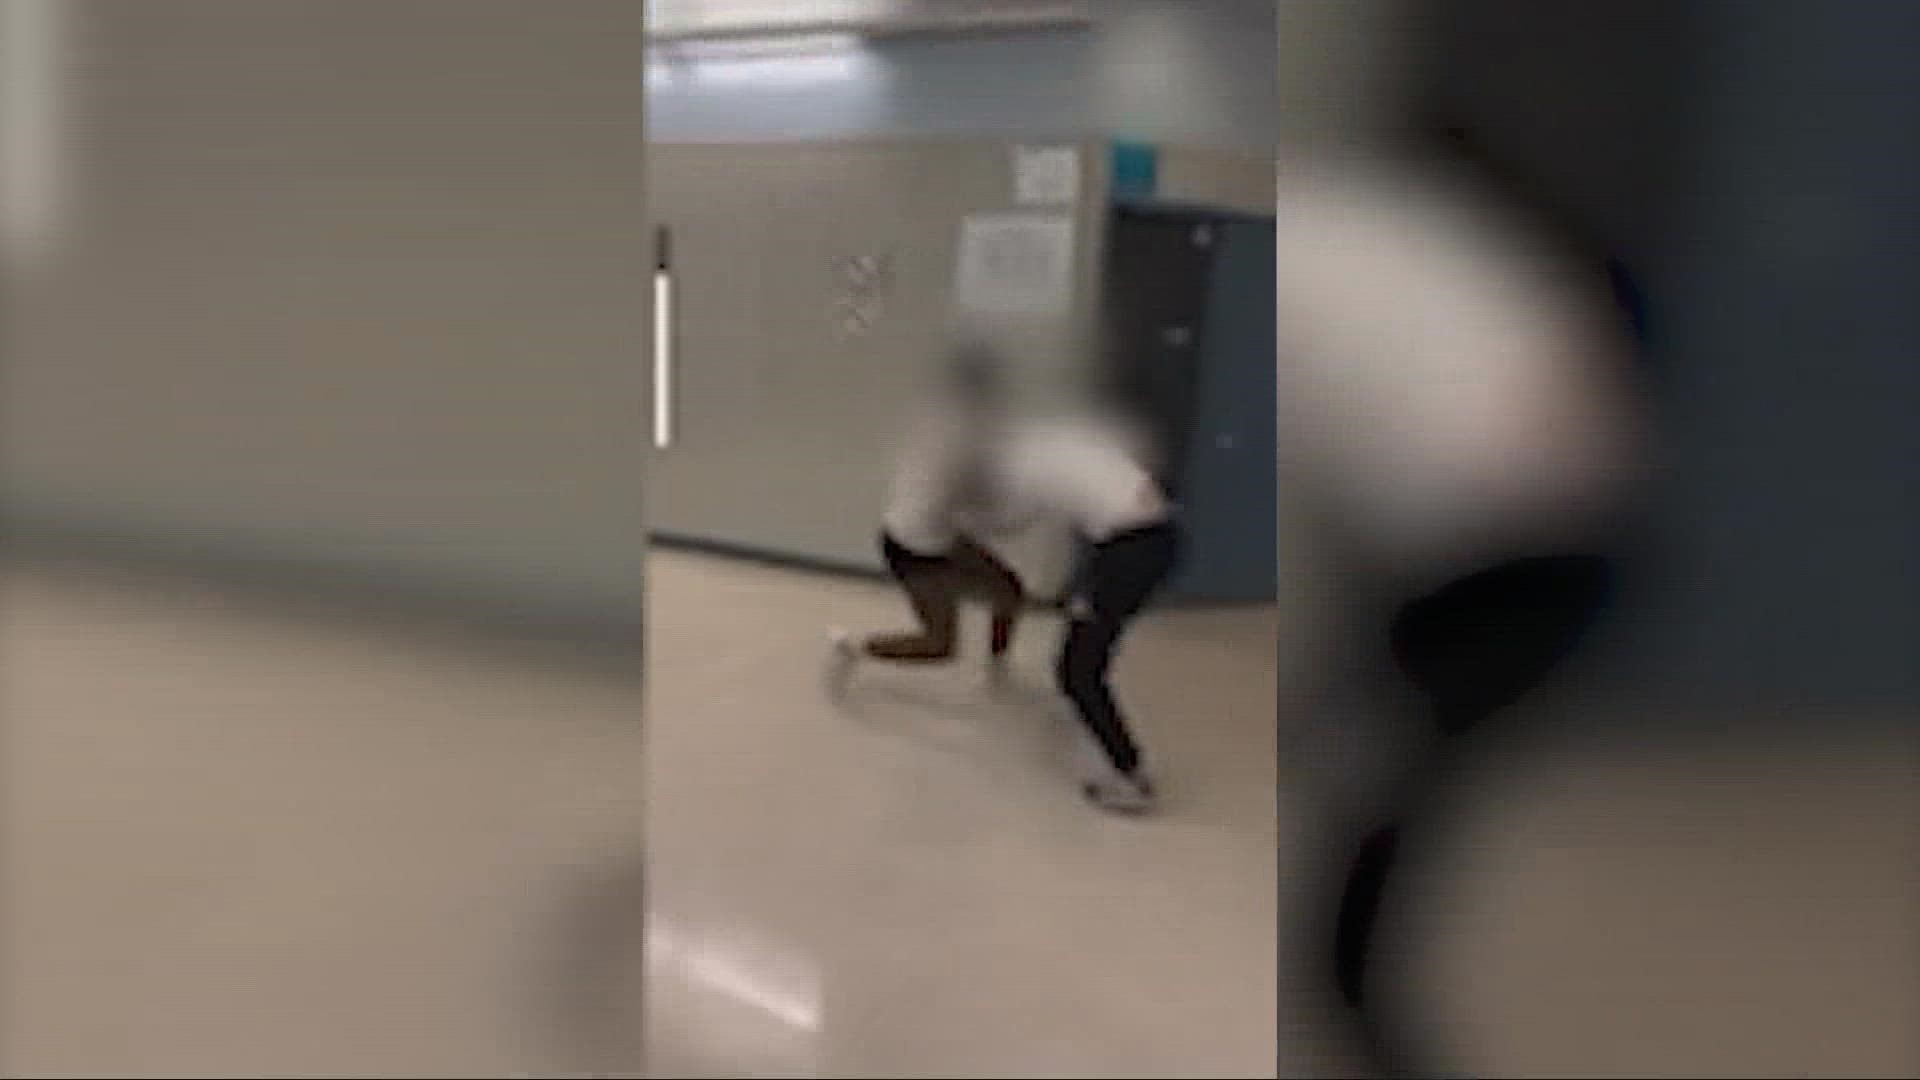 suspended from school for fighting